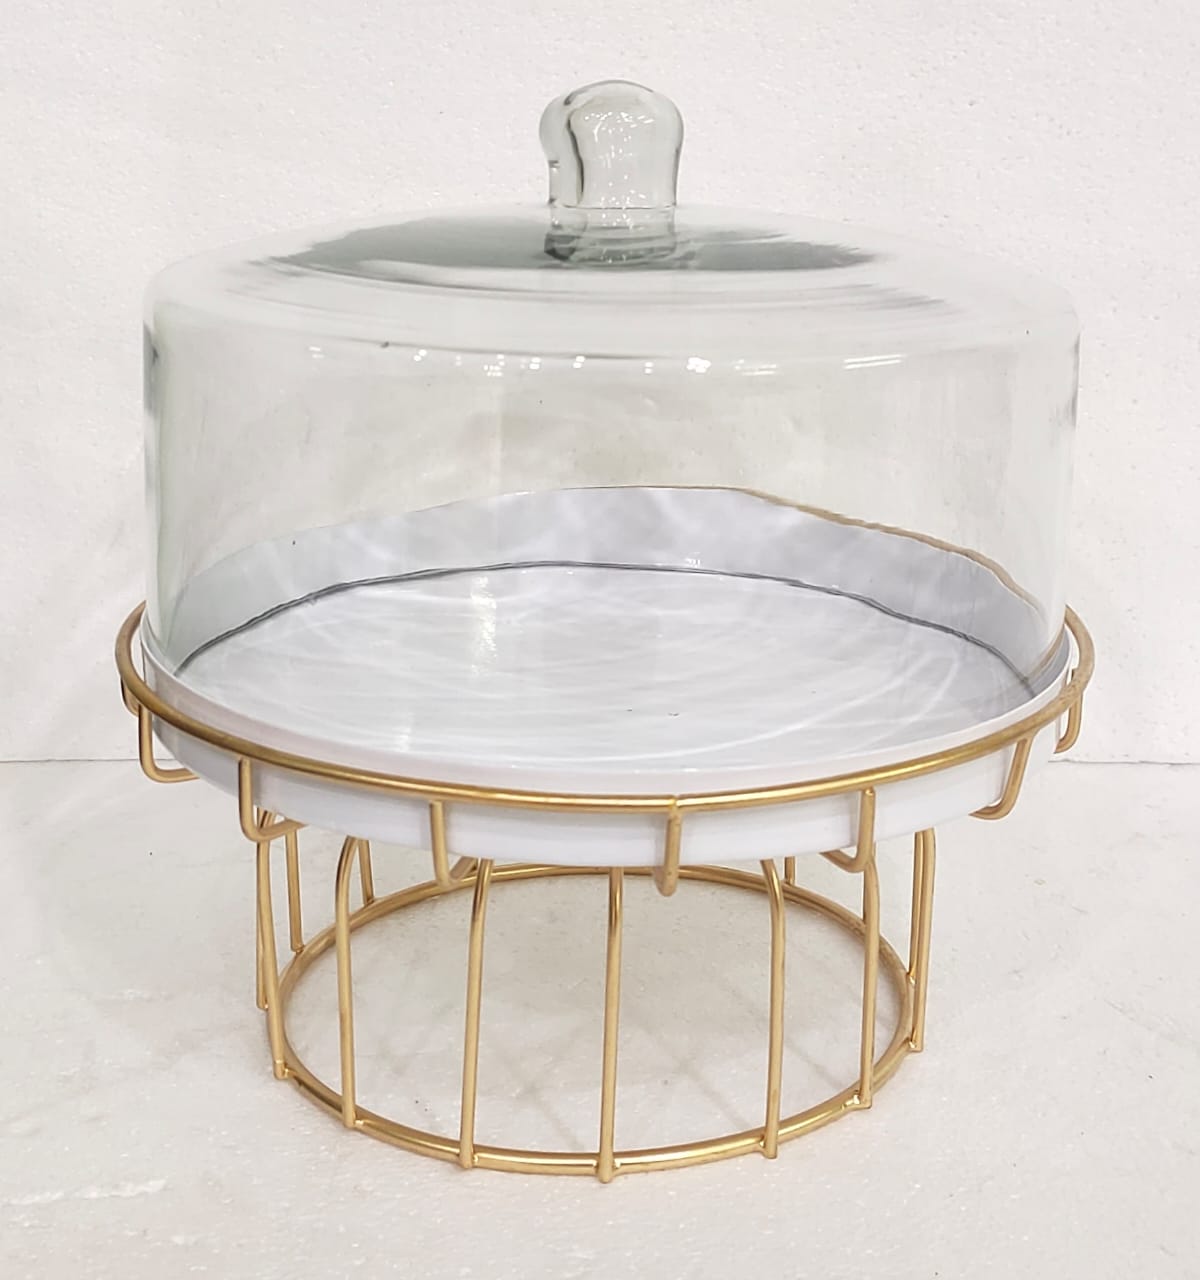 Metal Cake Stand with Glass Top, Green and Gold